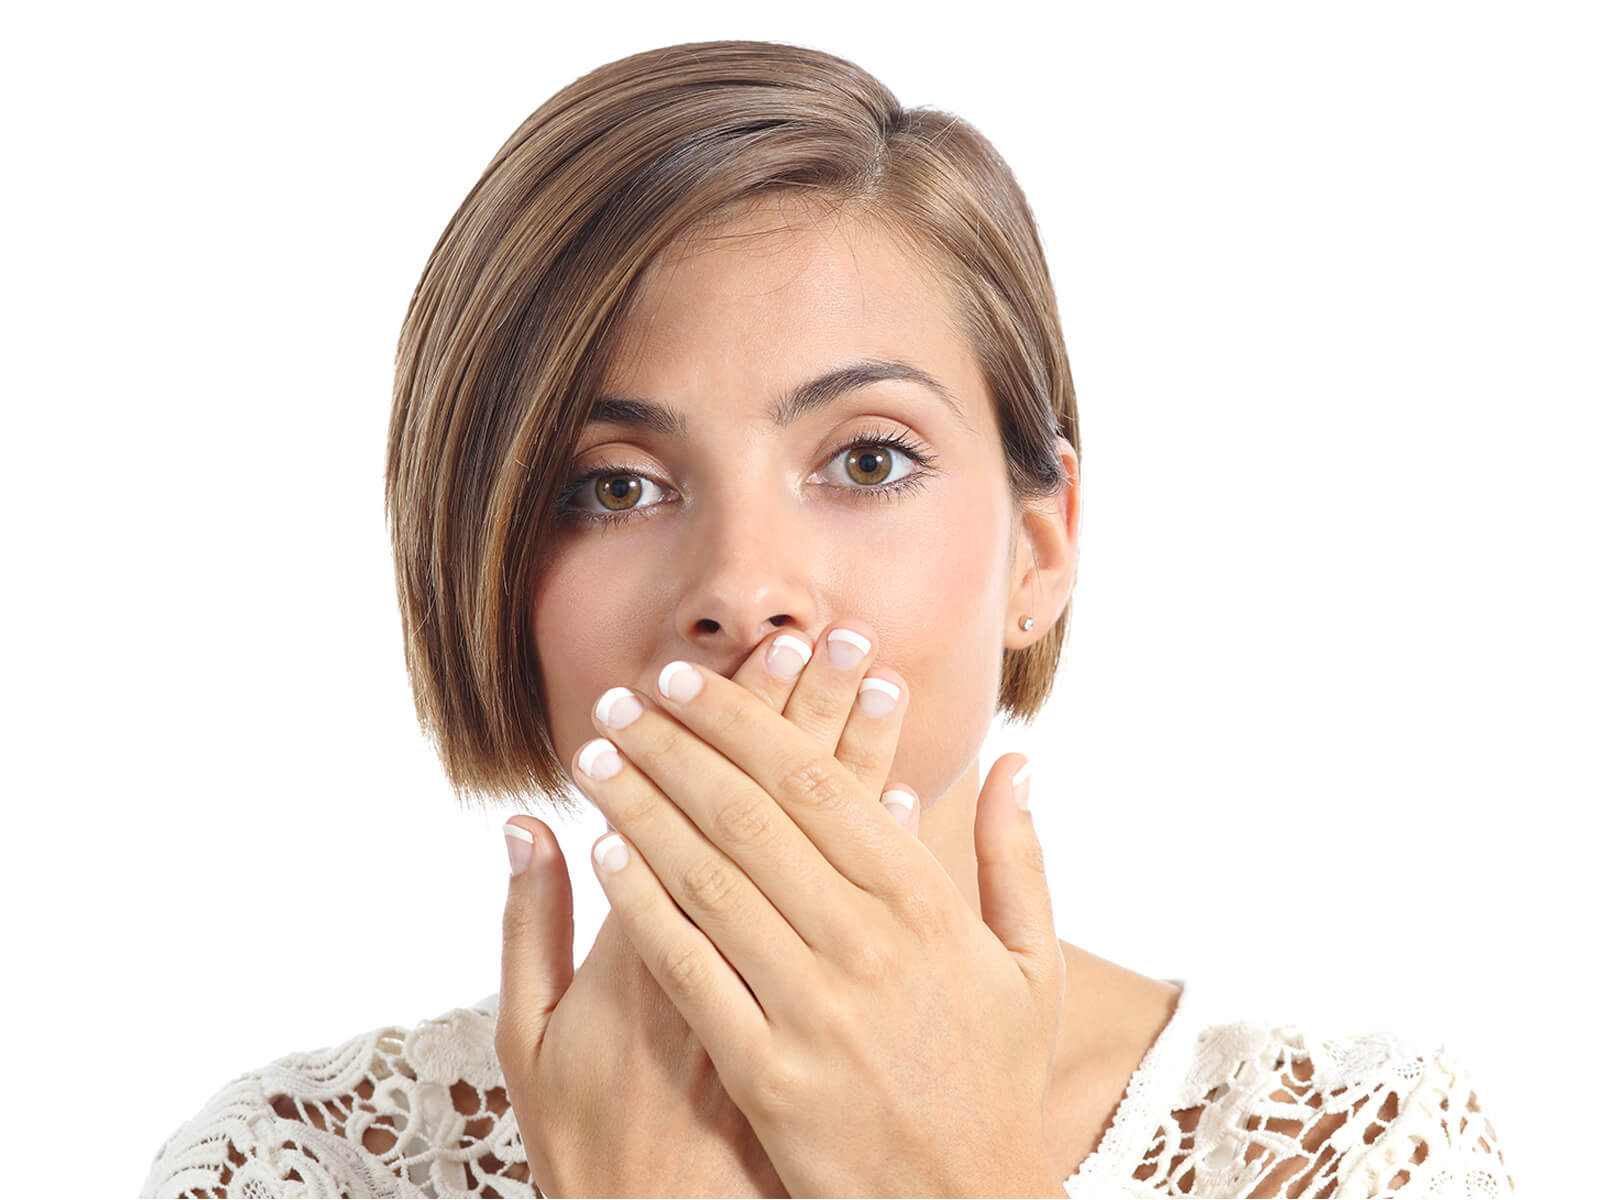 5 Factors Causing Bad Breath That You Didn’t Know About